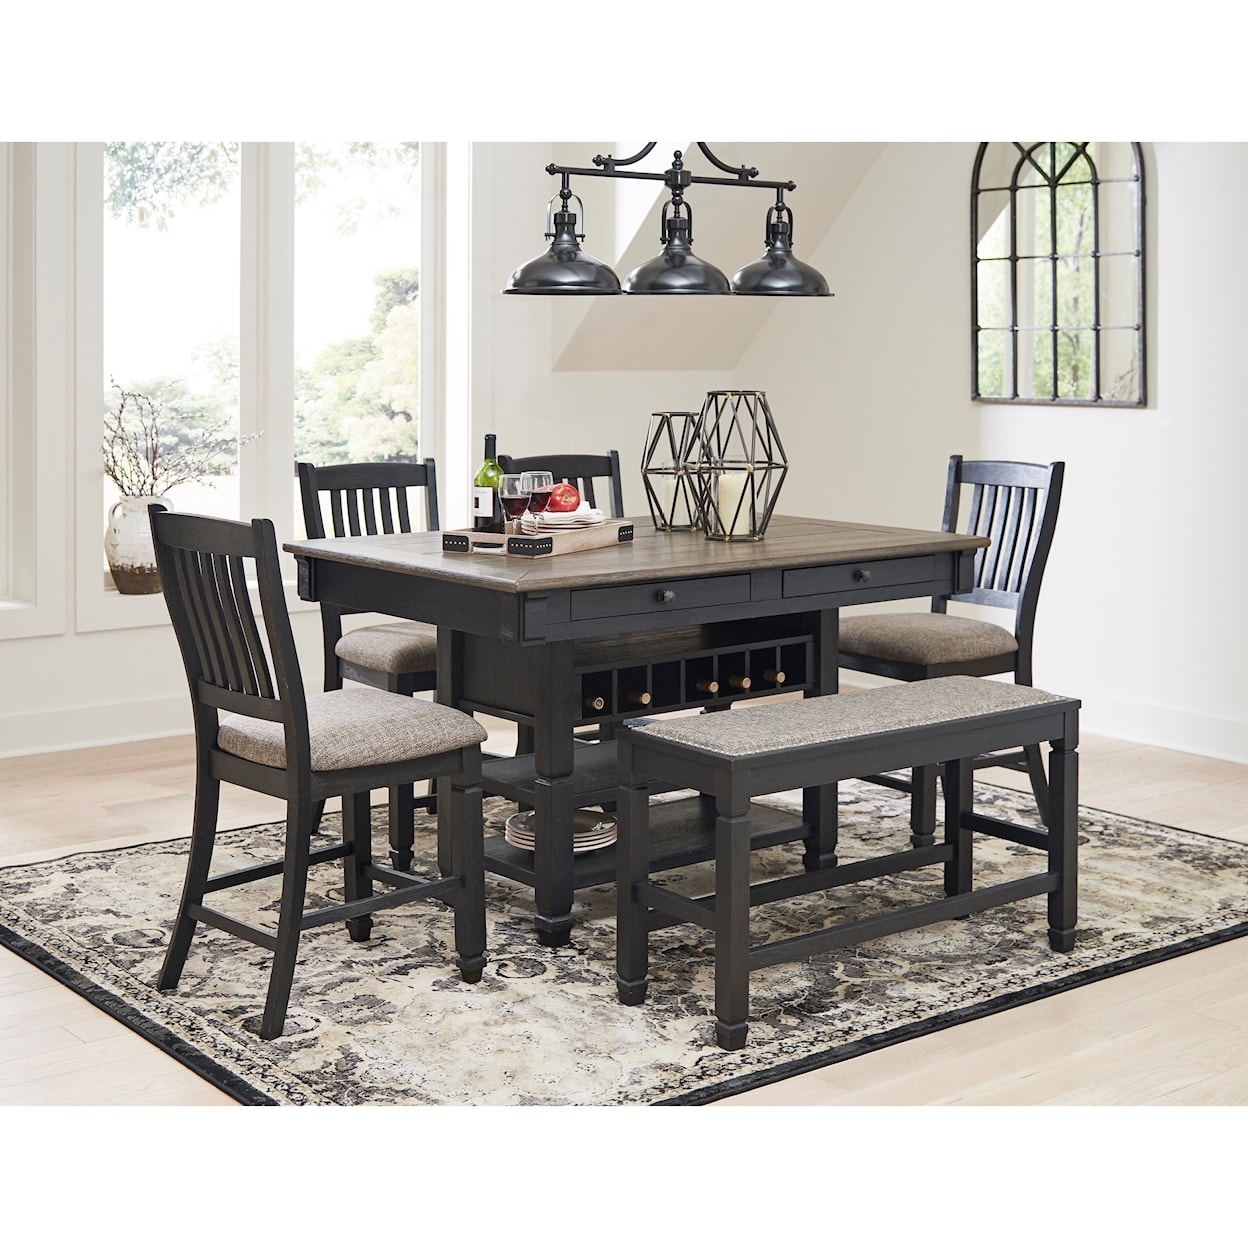 Signature Design by Ashley Tyler Creek 6-Piece Counter Table Set with Bench